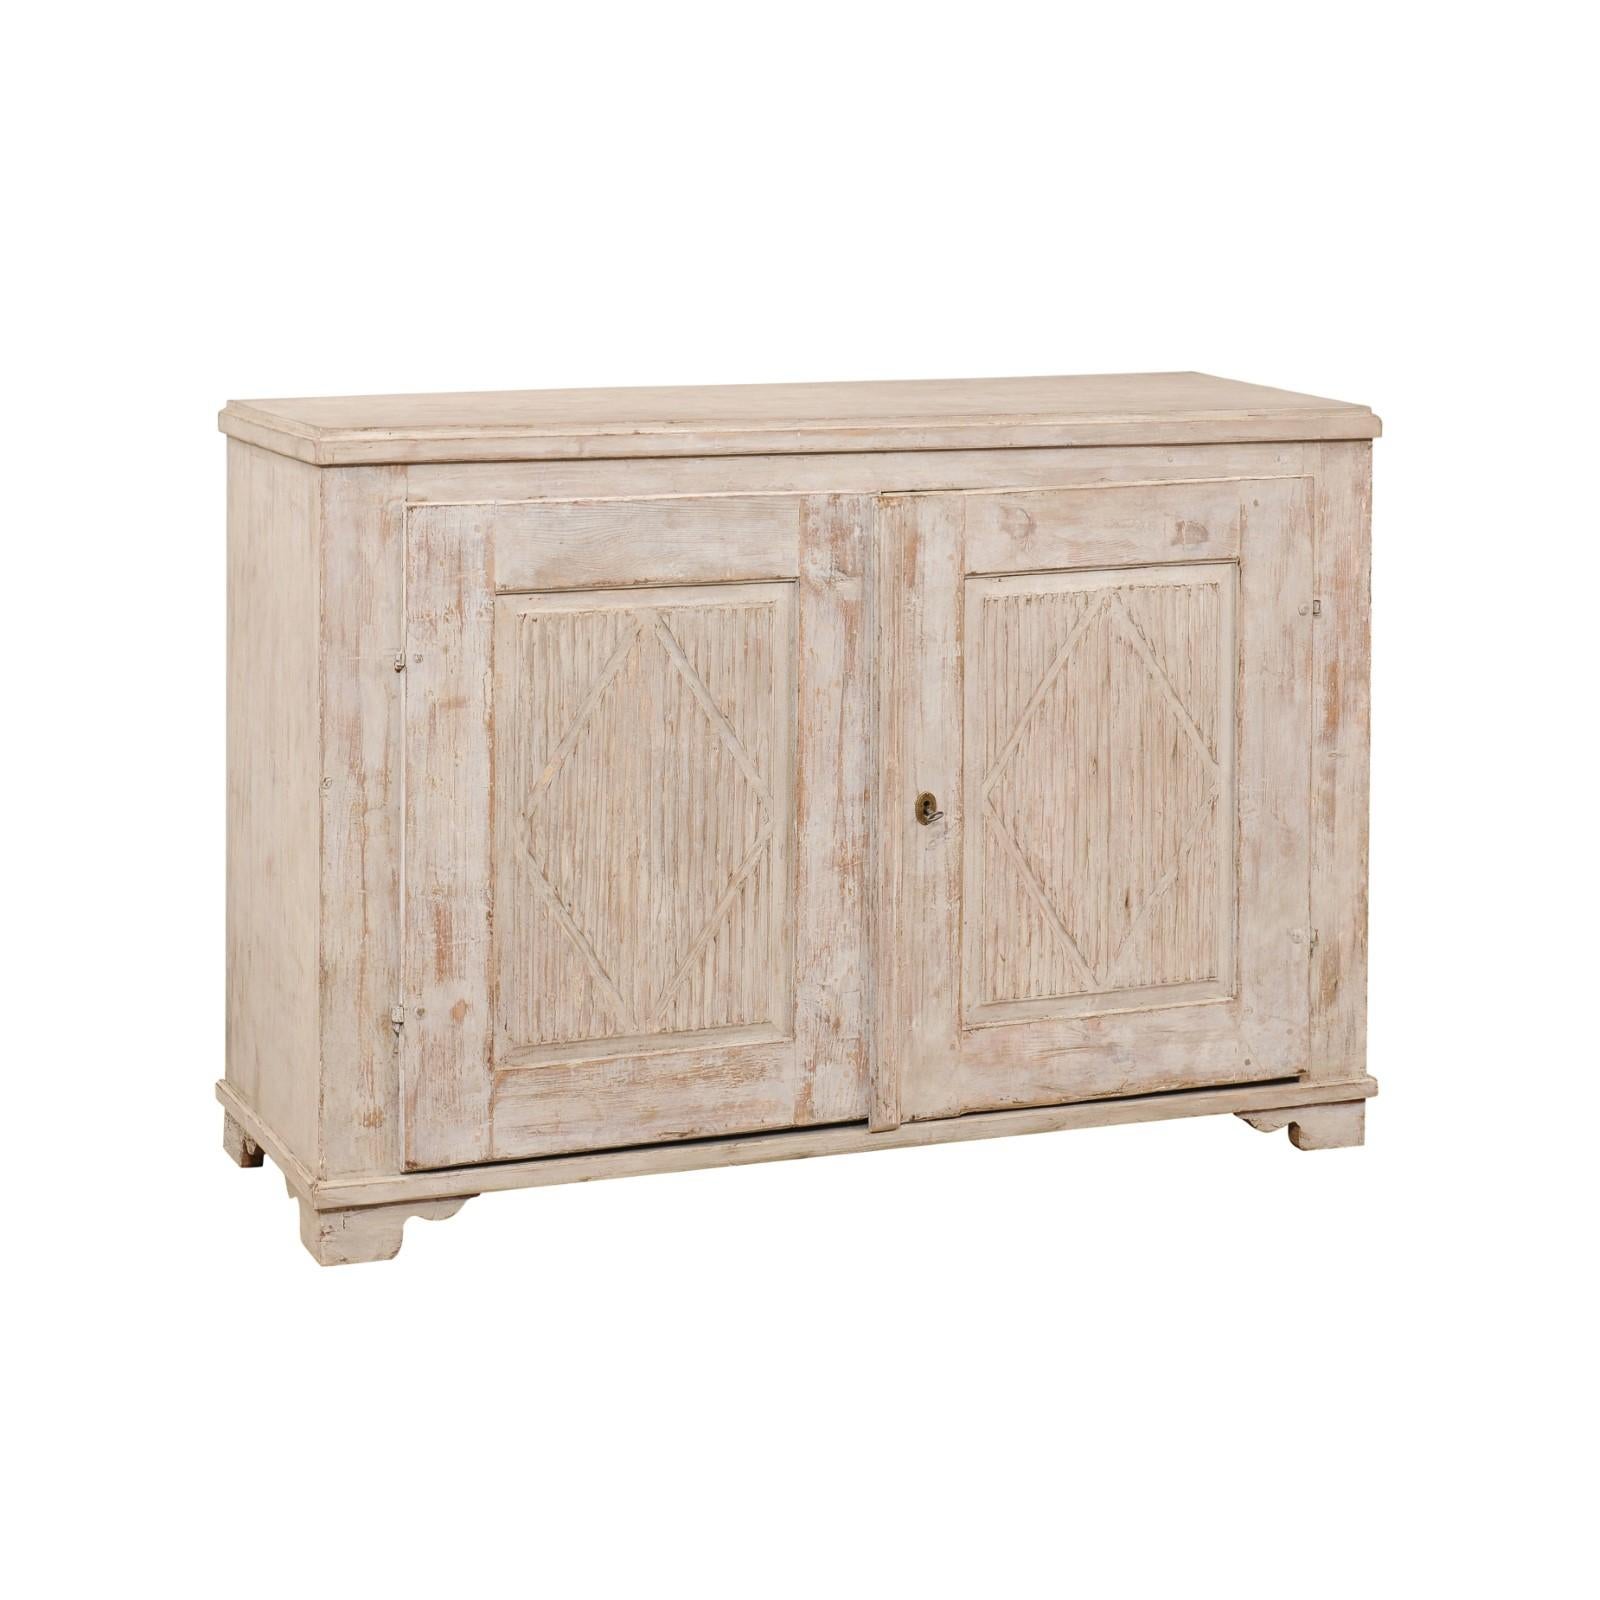 A Swedish Gustavian period painted wood sideboard from the early 19th century, with reeded doors, diamond motifs and carved ogee bracket feet. Created in Sweden during the first quarter of the 19th century, this Gustavian sideboard features a